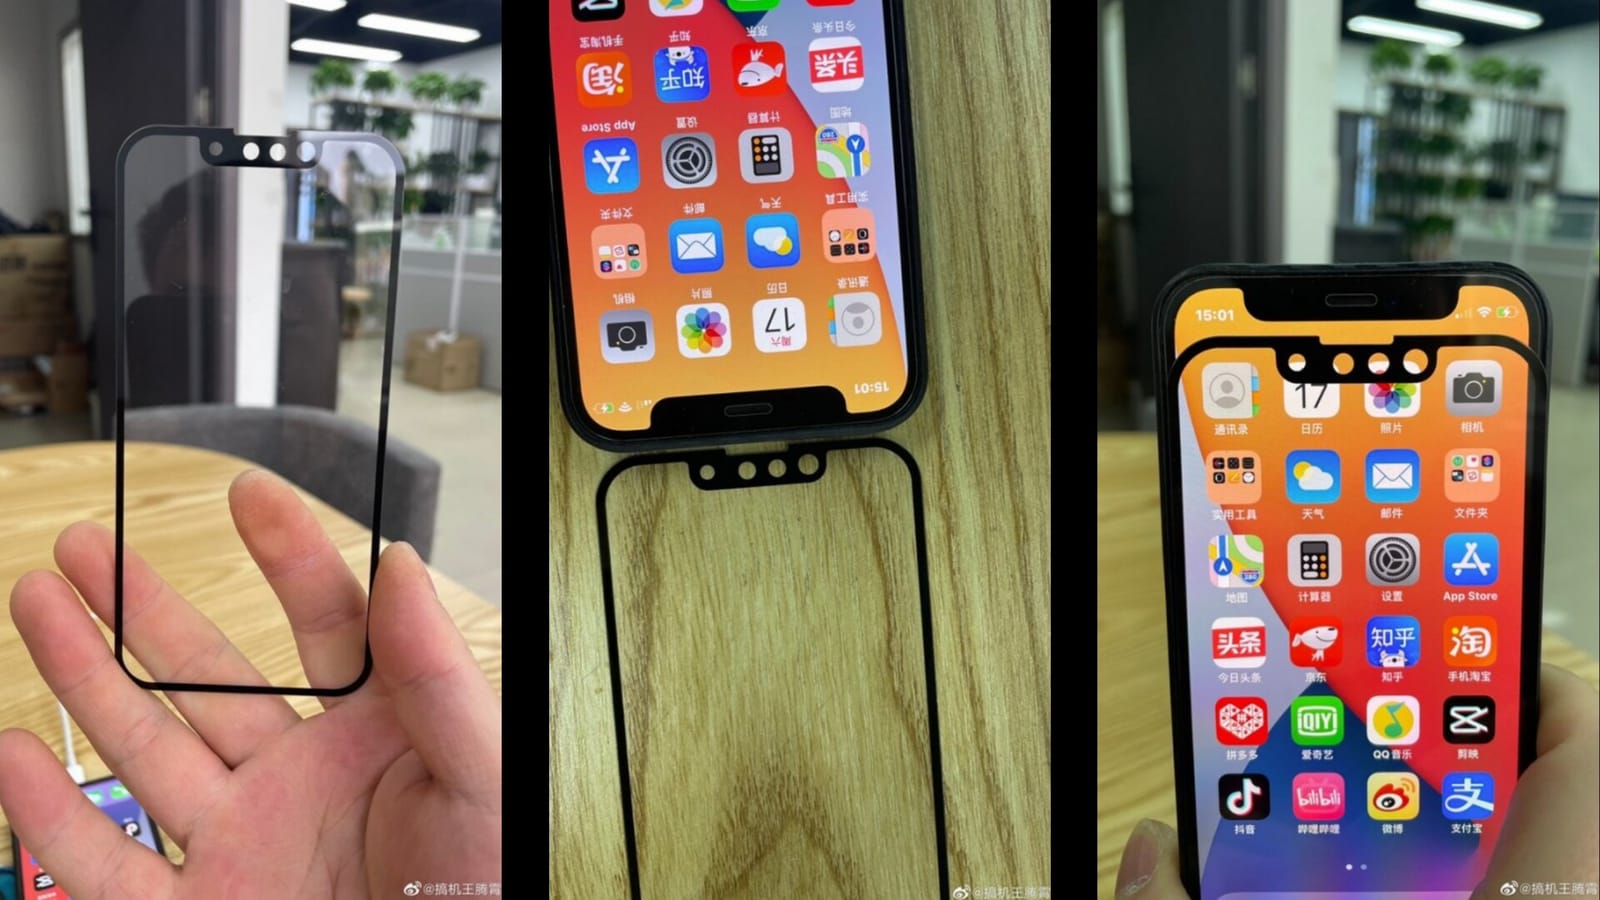 iPhone 13 might come with a smaller FaceID chip as compared to the iPhone 12 series